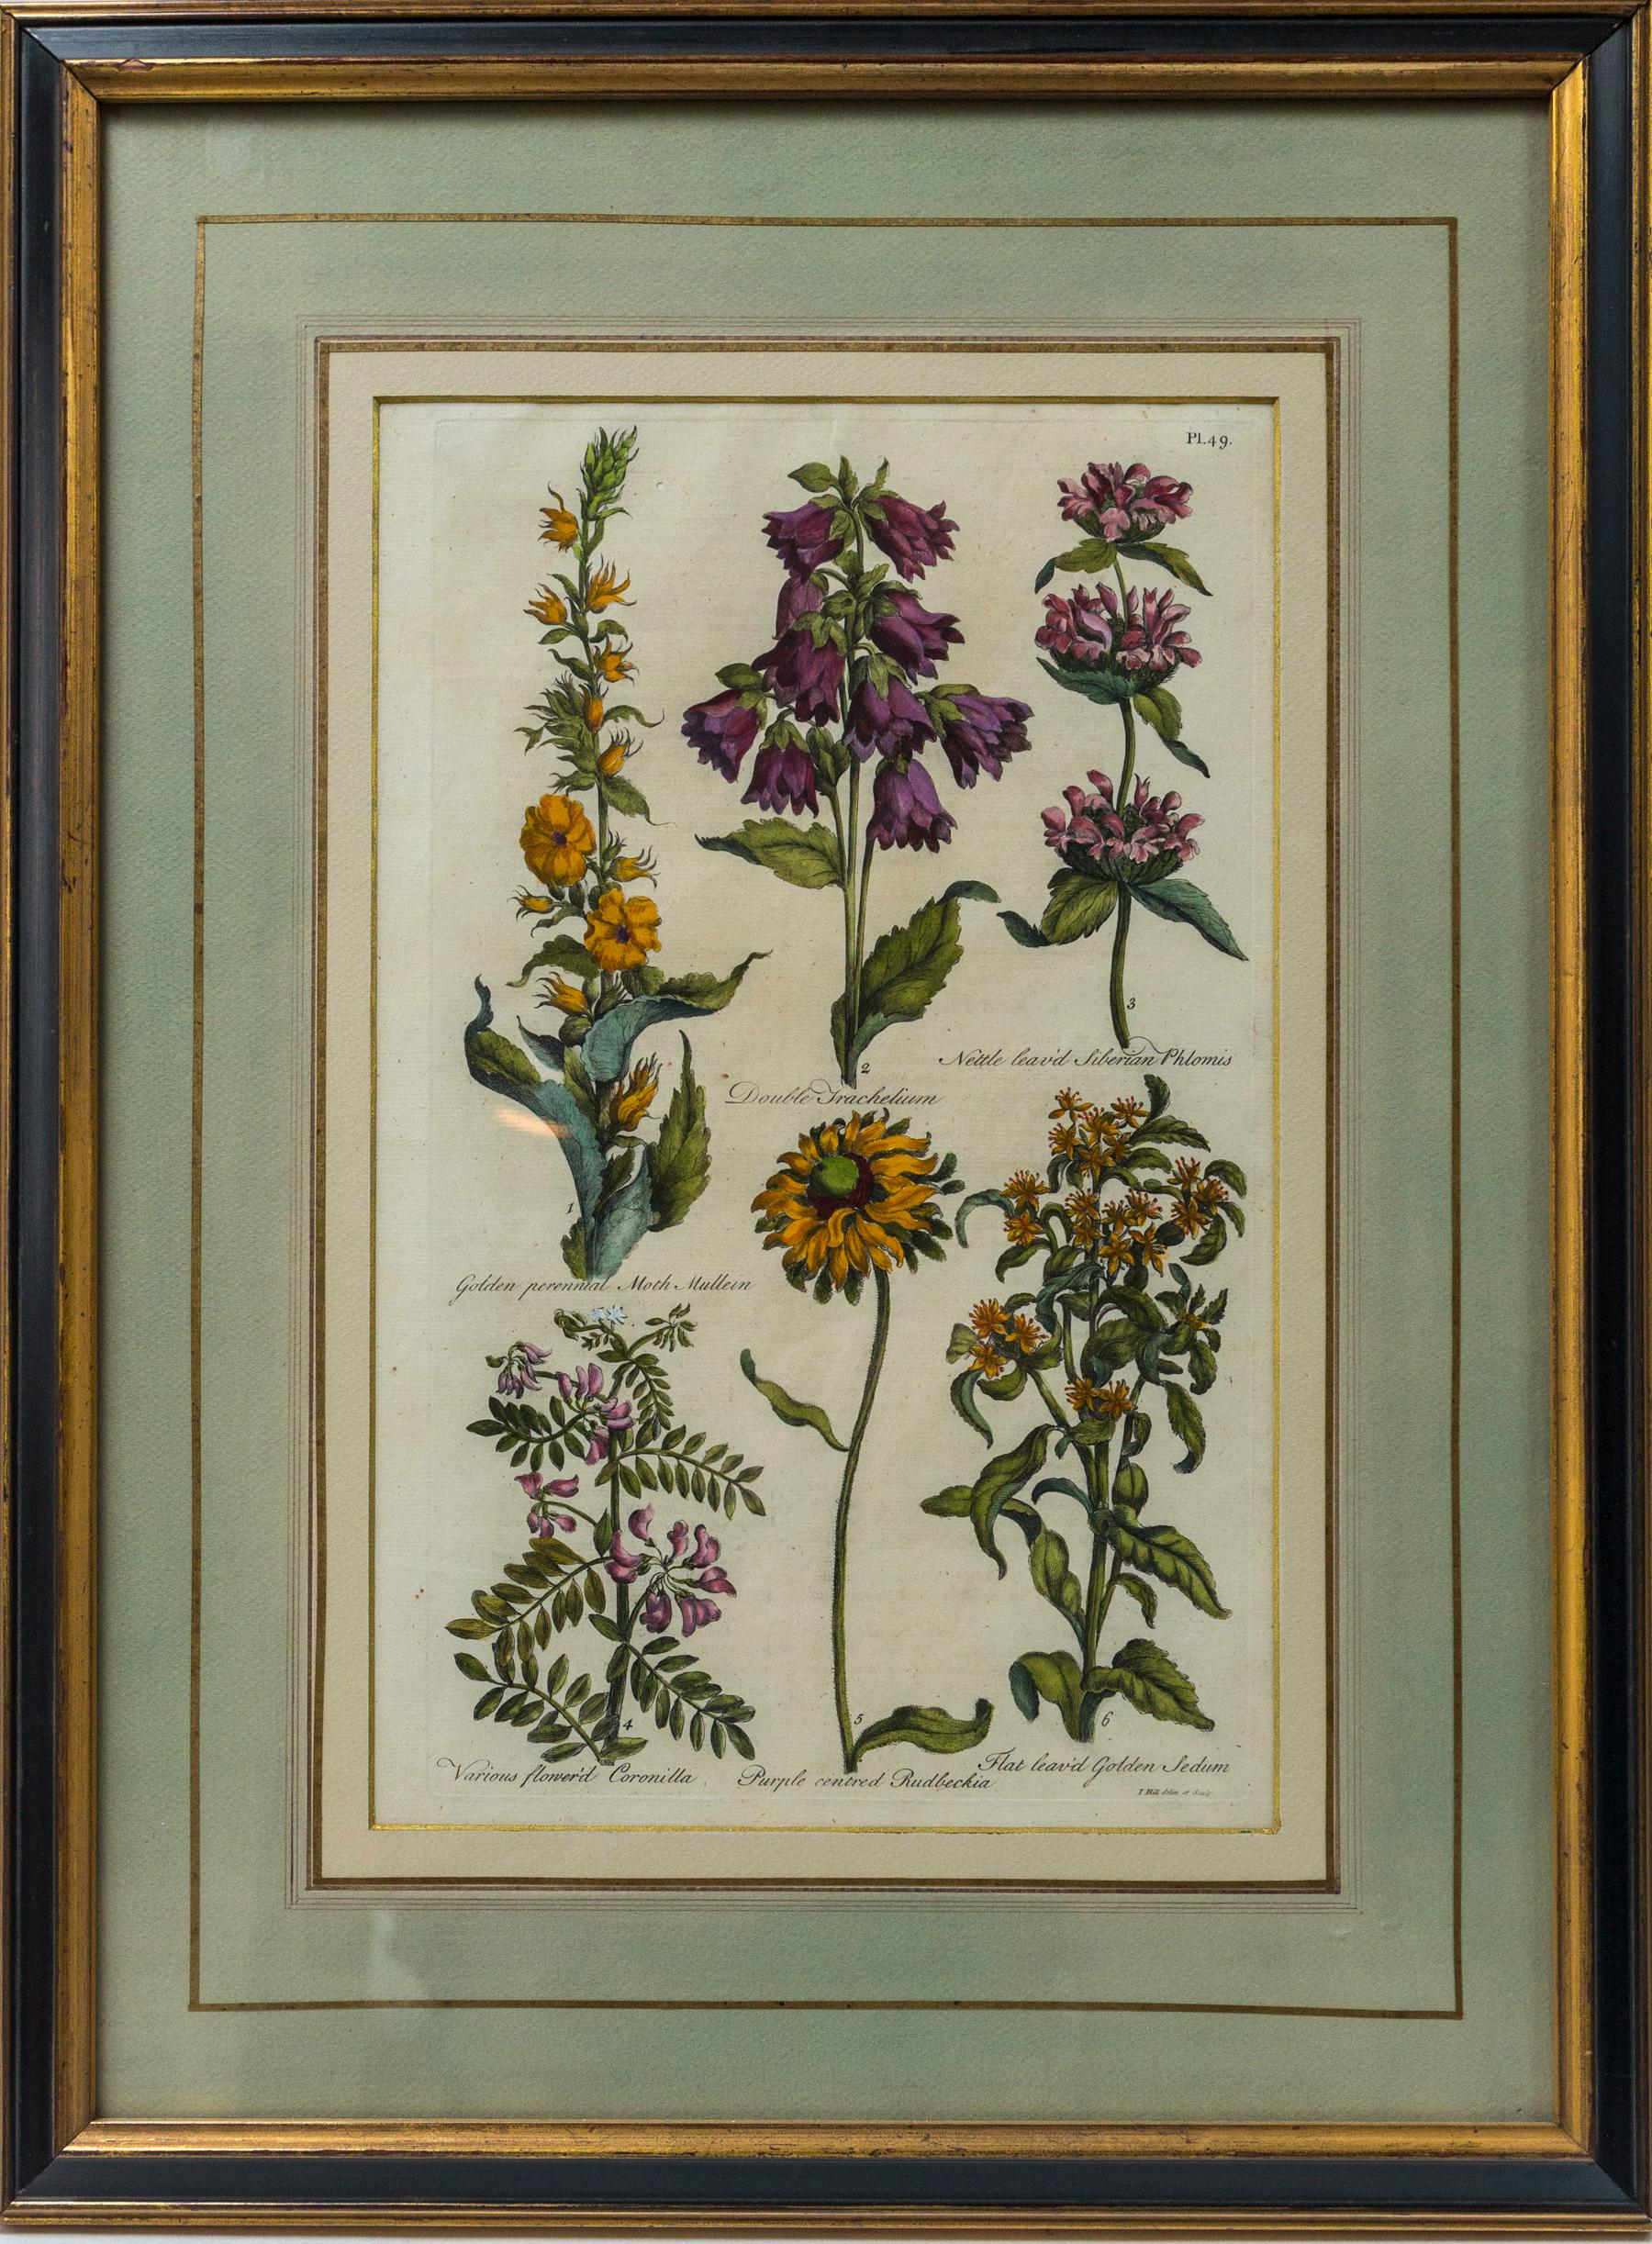 Hand-Painted Set of 8 Hand Colored Floral Engravings